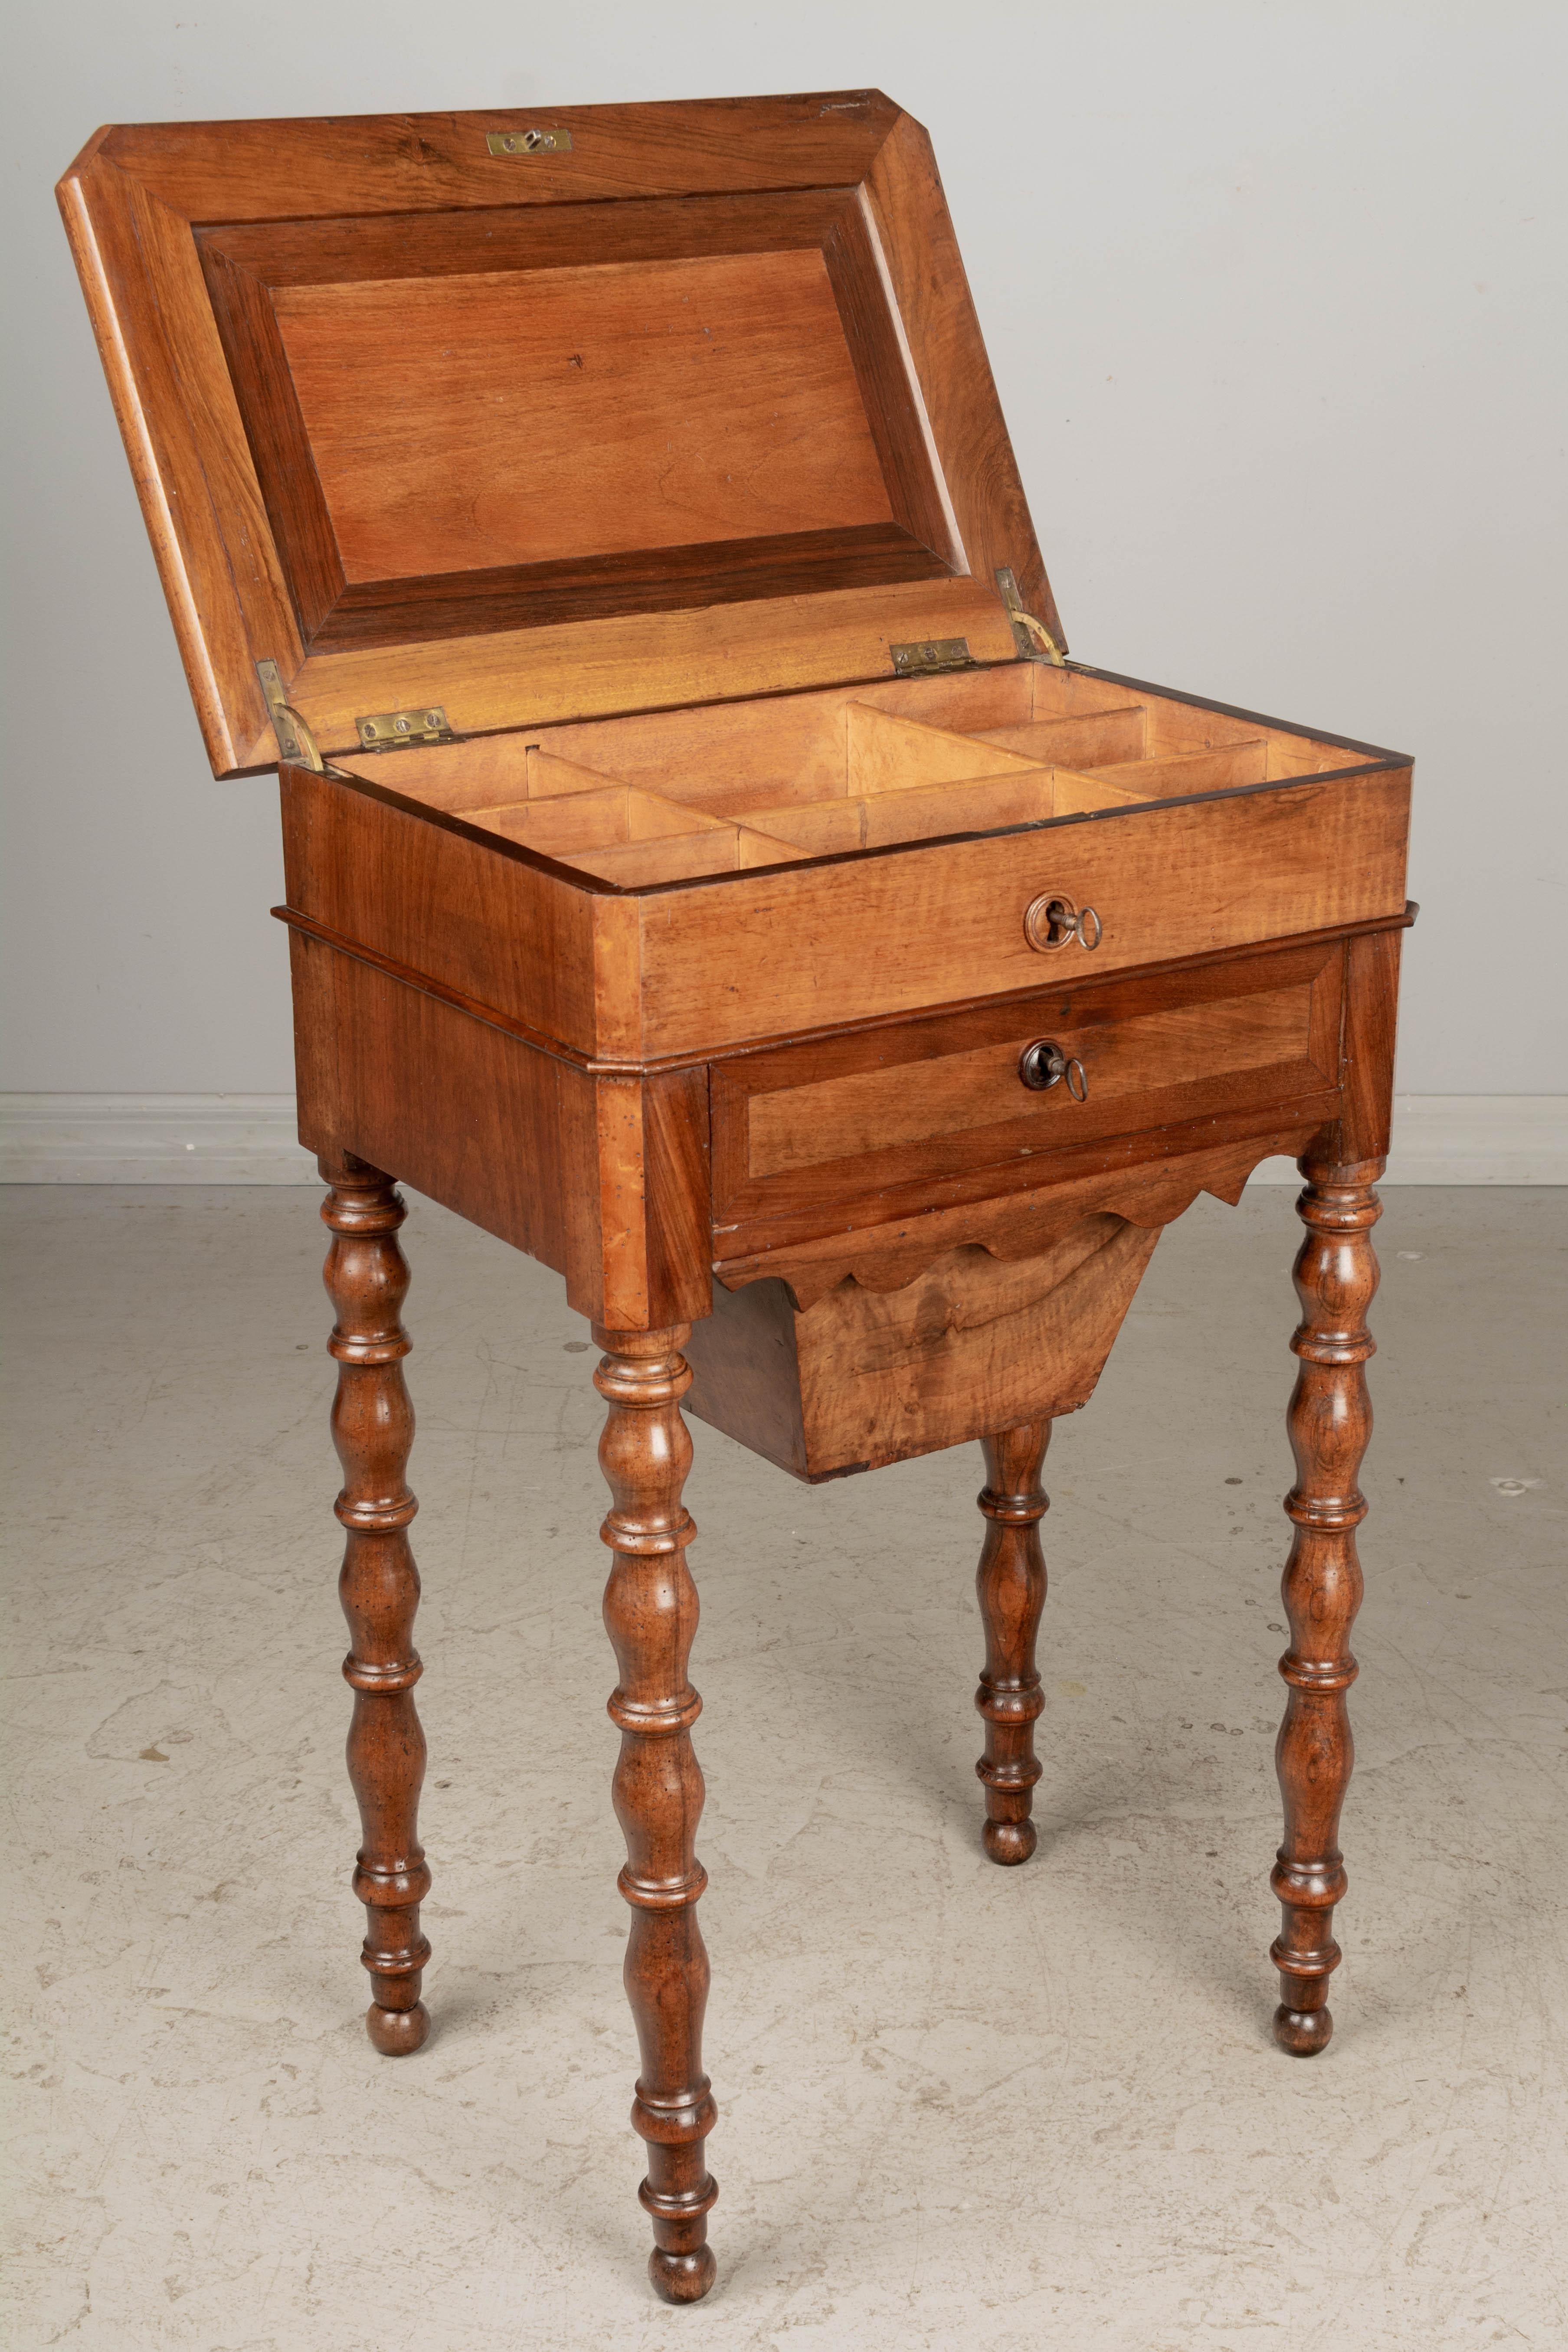 Hand-Crafted 19th Century French Louis Philippe Travailleuse or Side Table For Sale